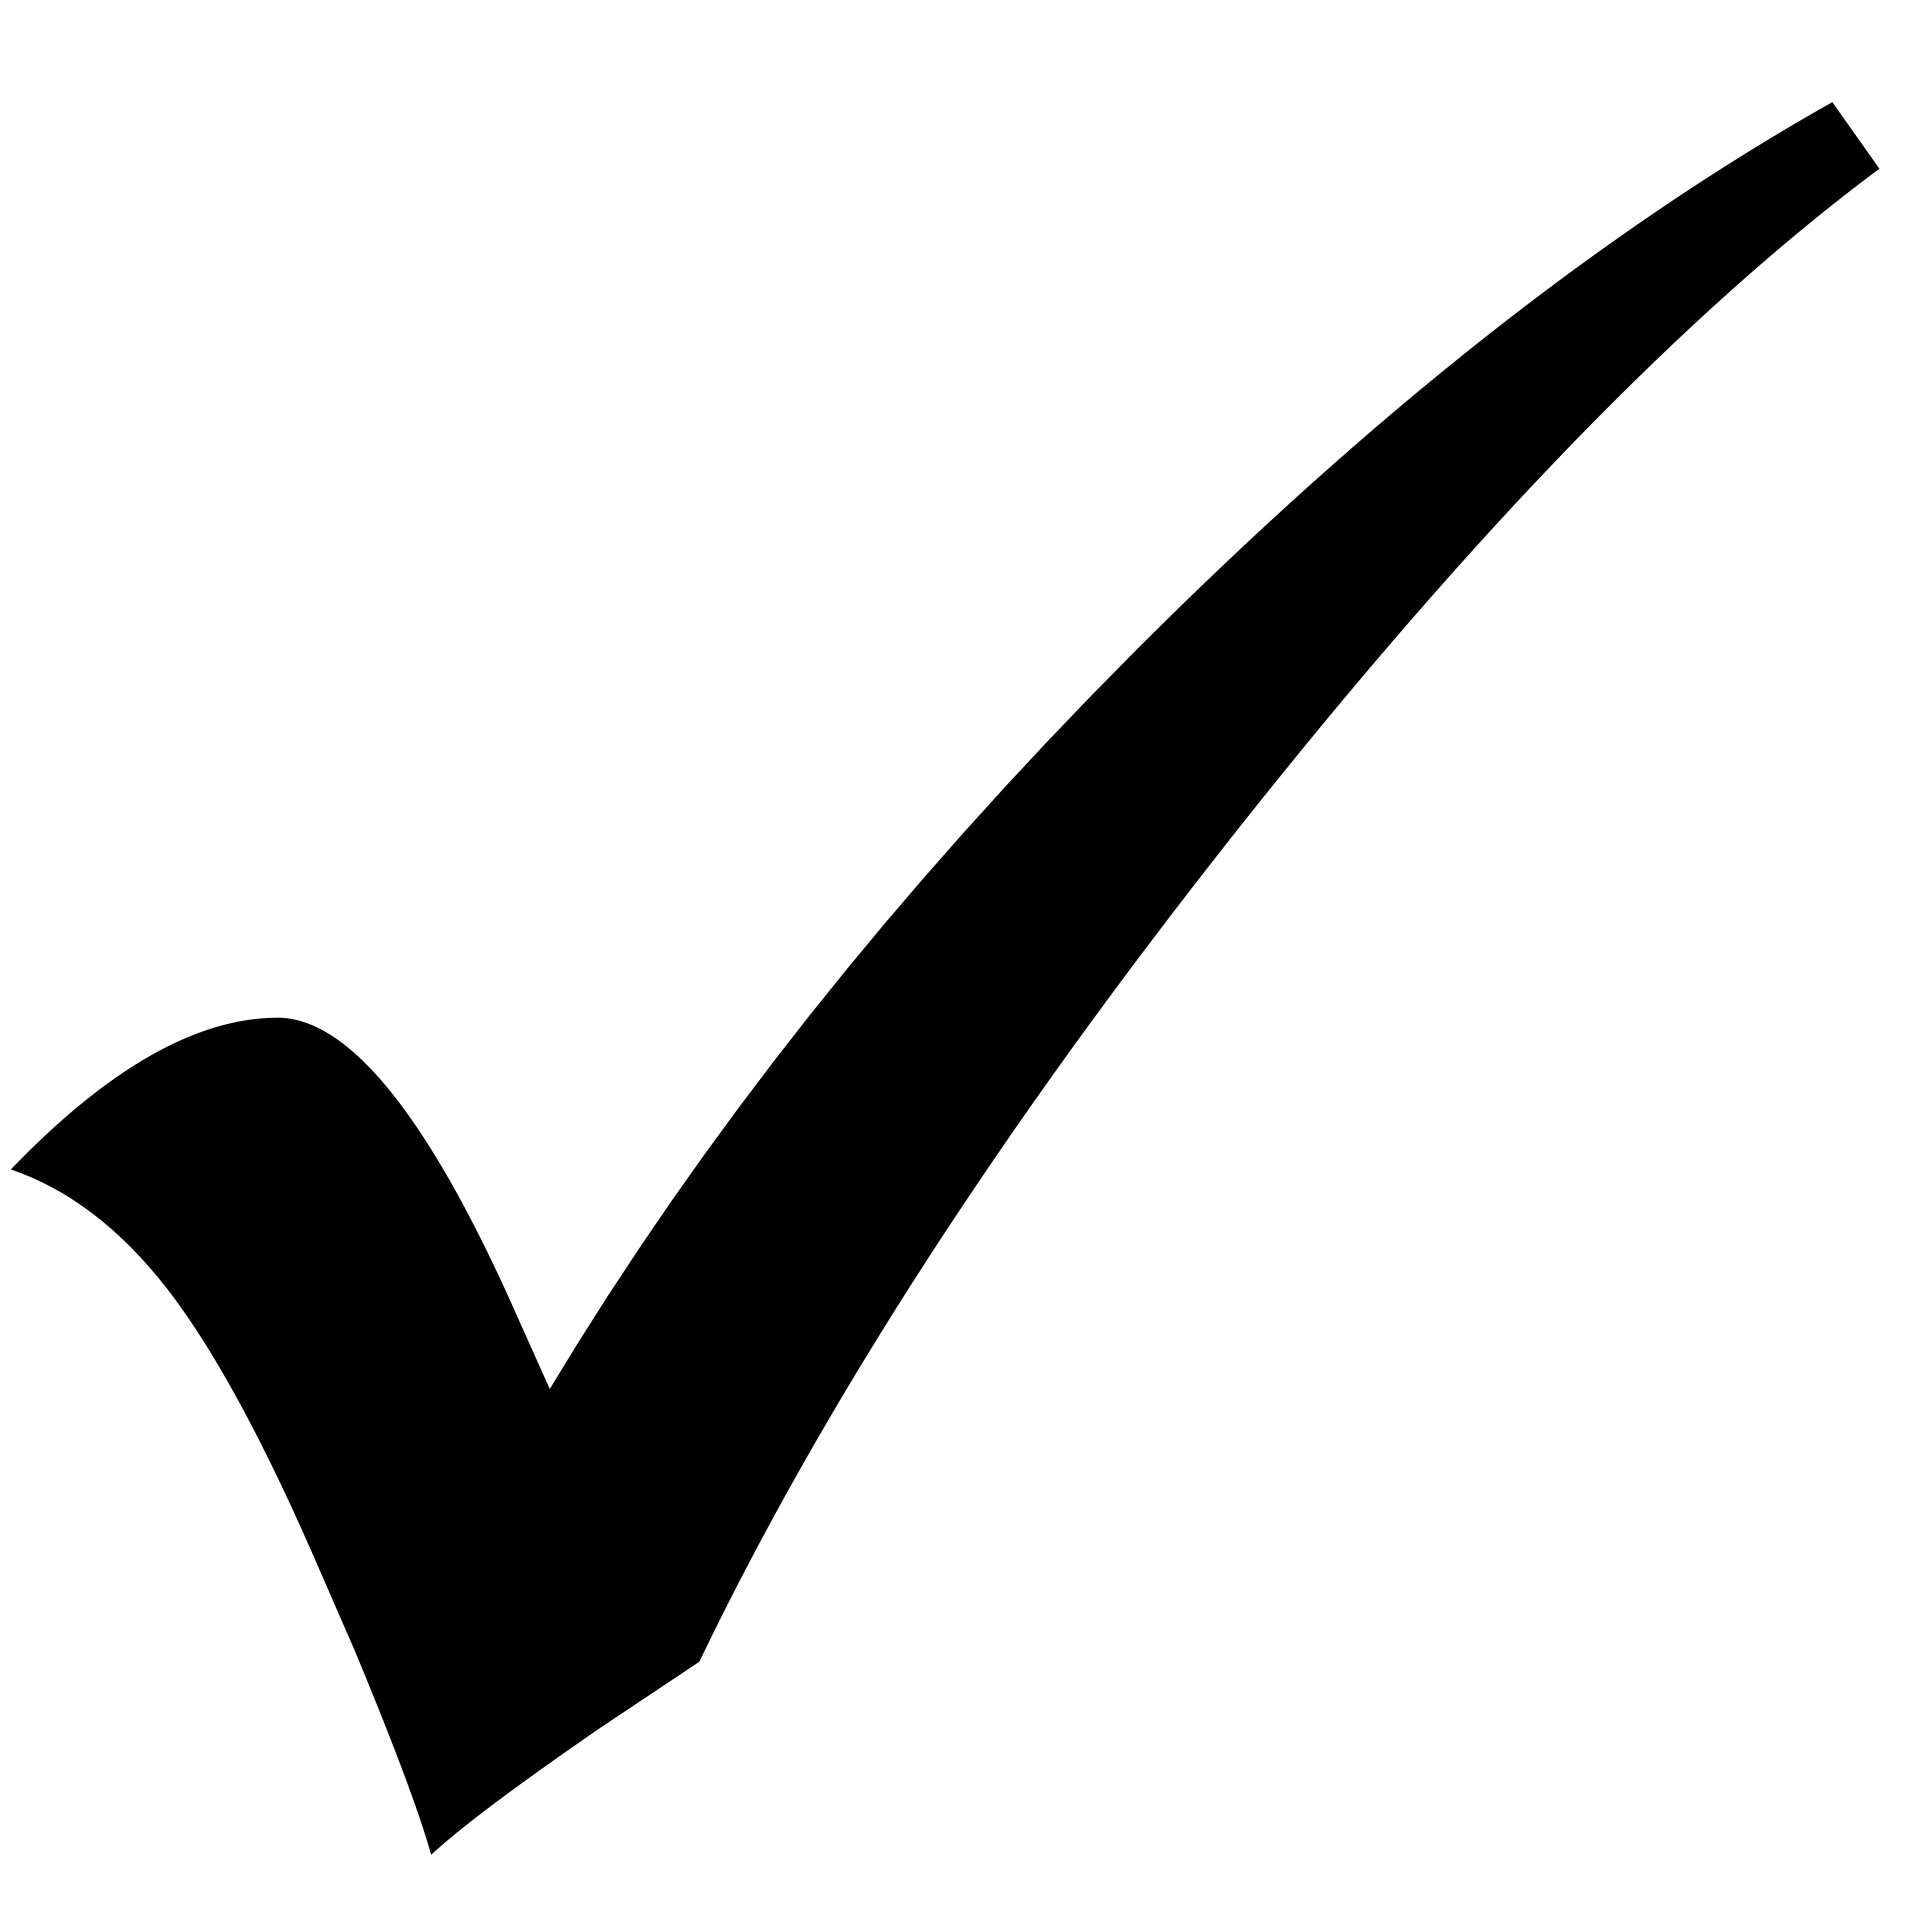 Like or correct symbol, Confirmed or approved button, Check mark